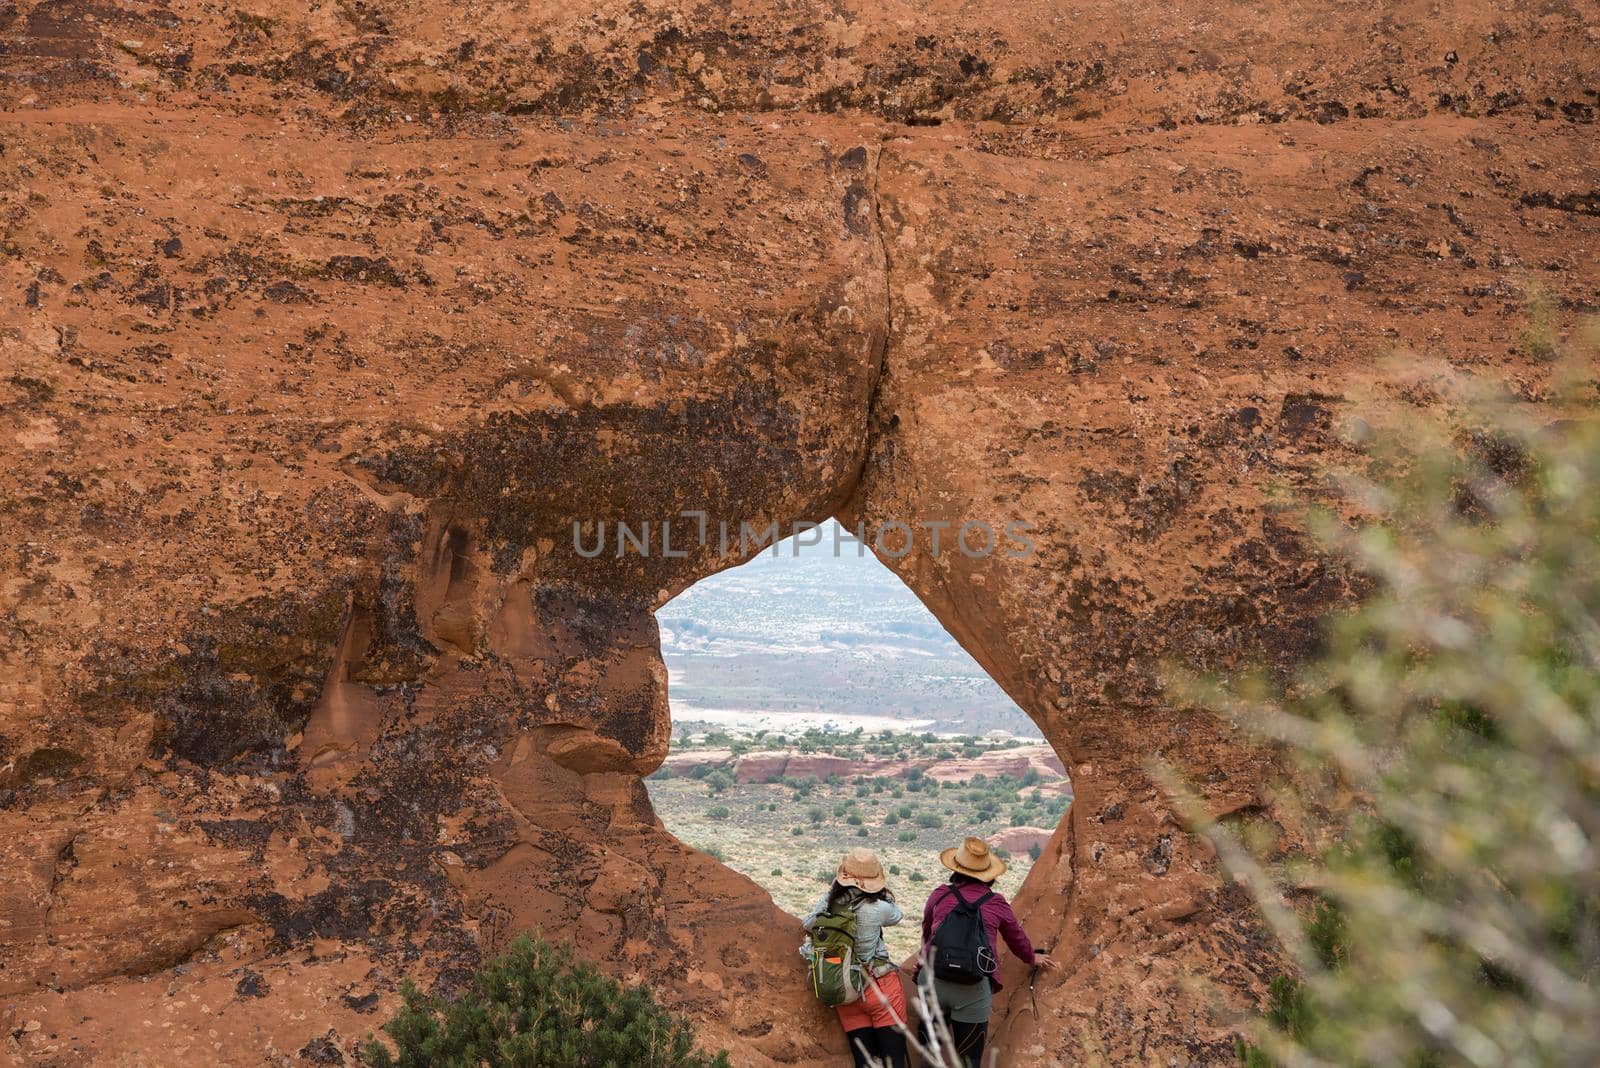 Couple looking through large window at Arches National Park